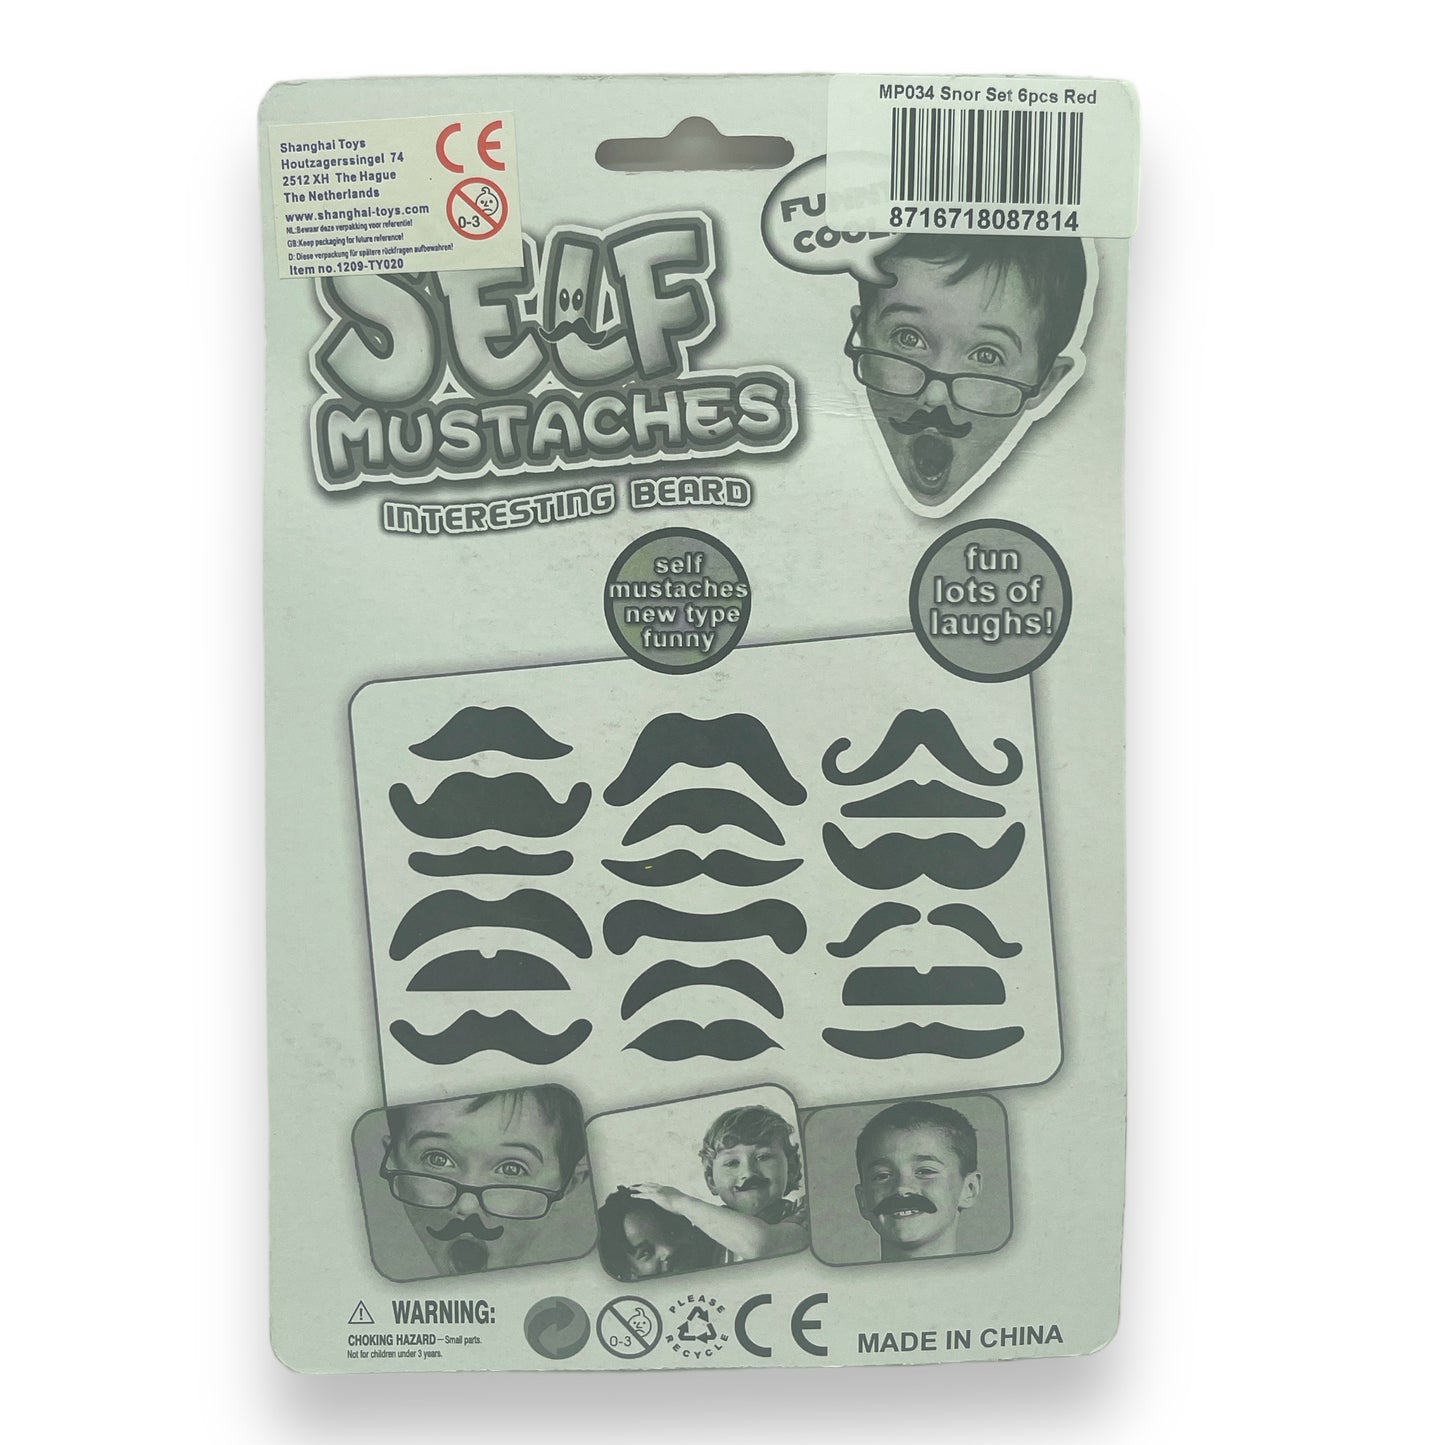 Kinky Pleasure - MP034 - Self Mustaches - 3 Models - 6 Pieces On Card